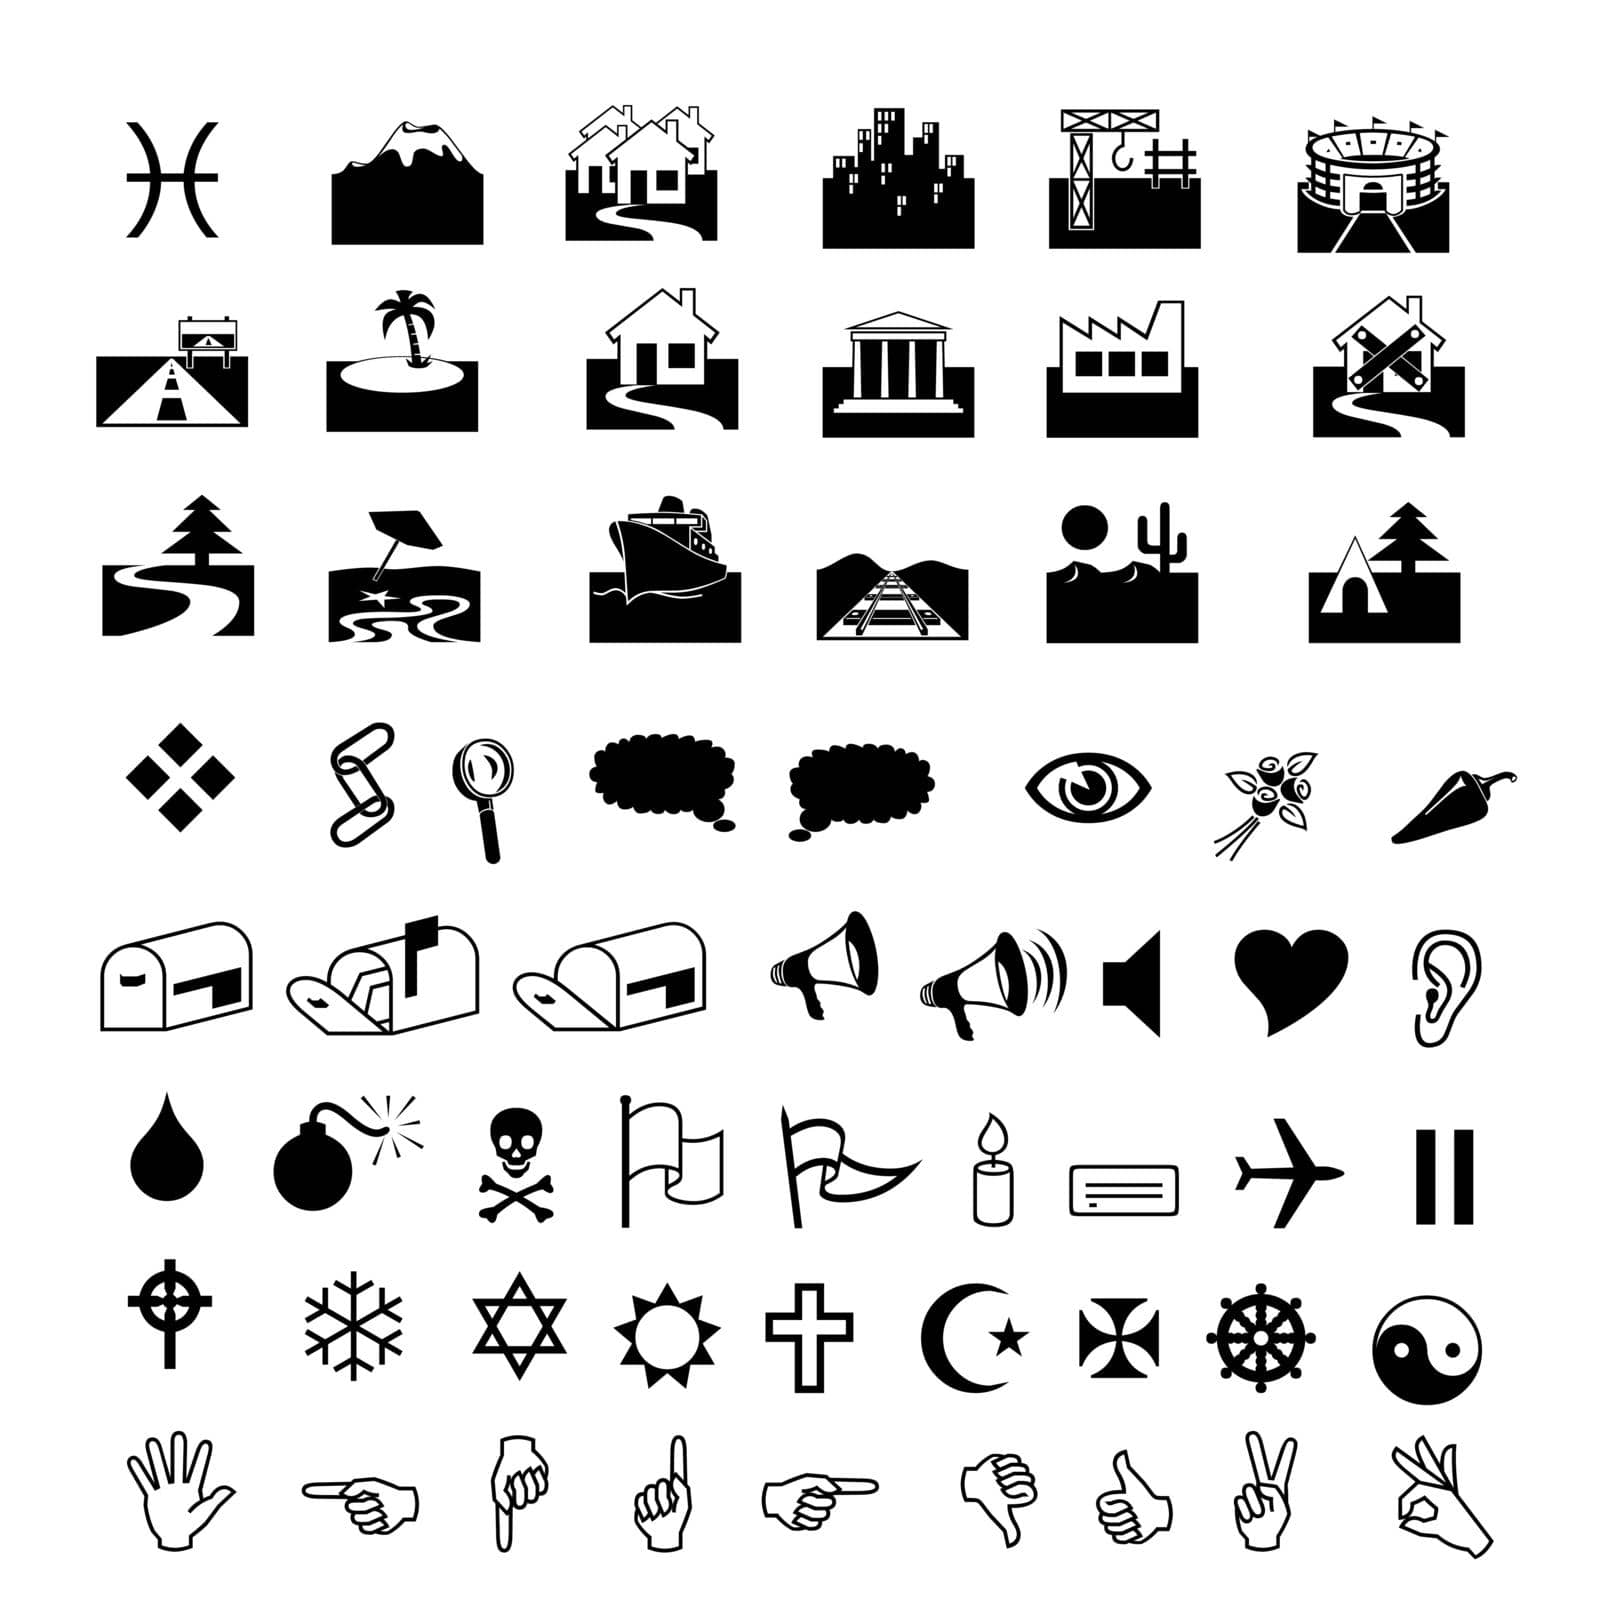 Black icons combine different types common on white background.